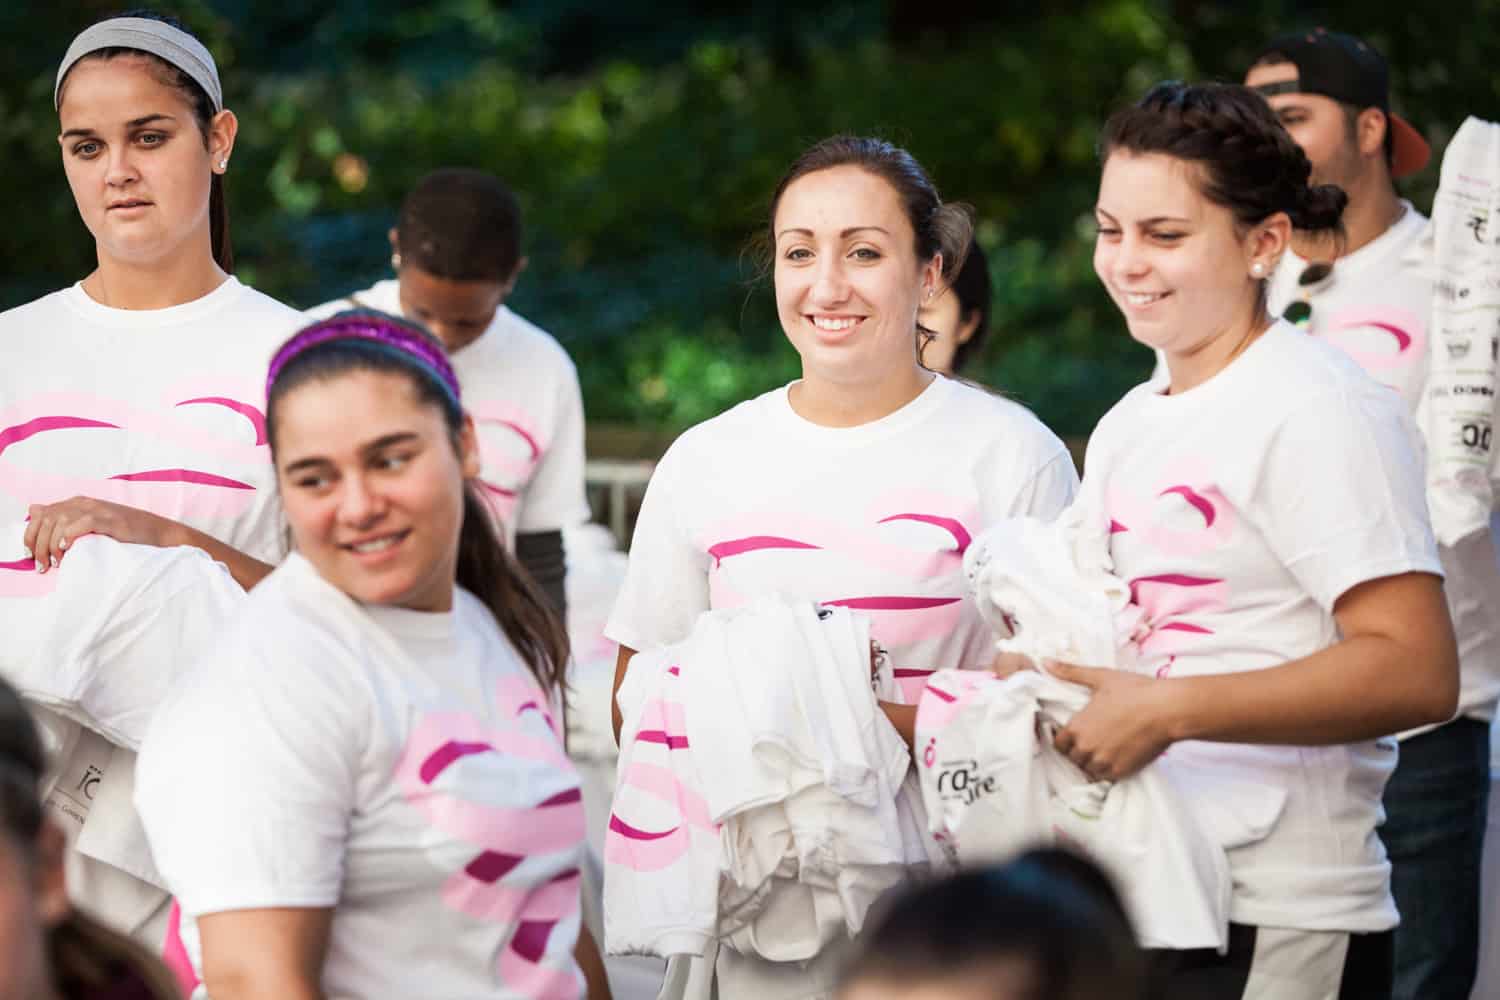 NYC Race for the Cure photos of group of runners wearing matching white t-shirts